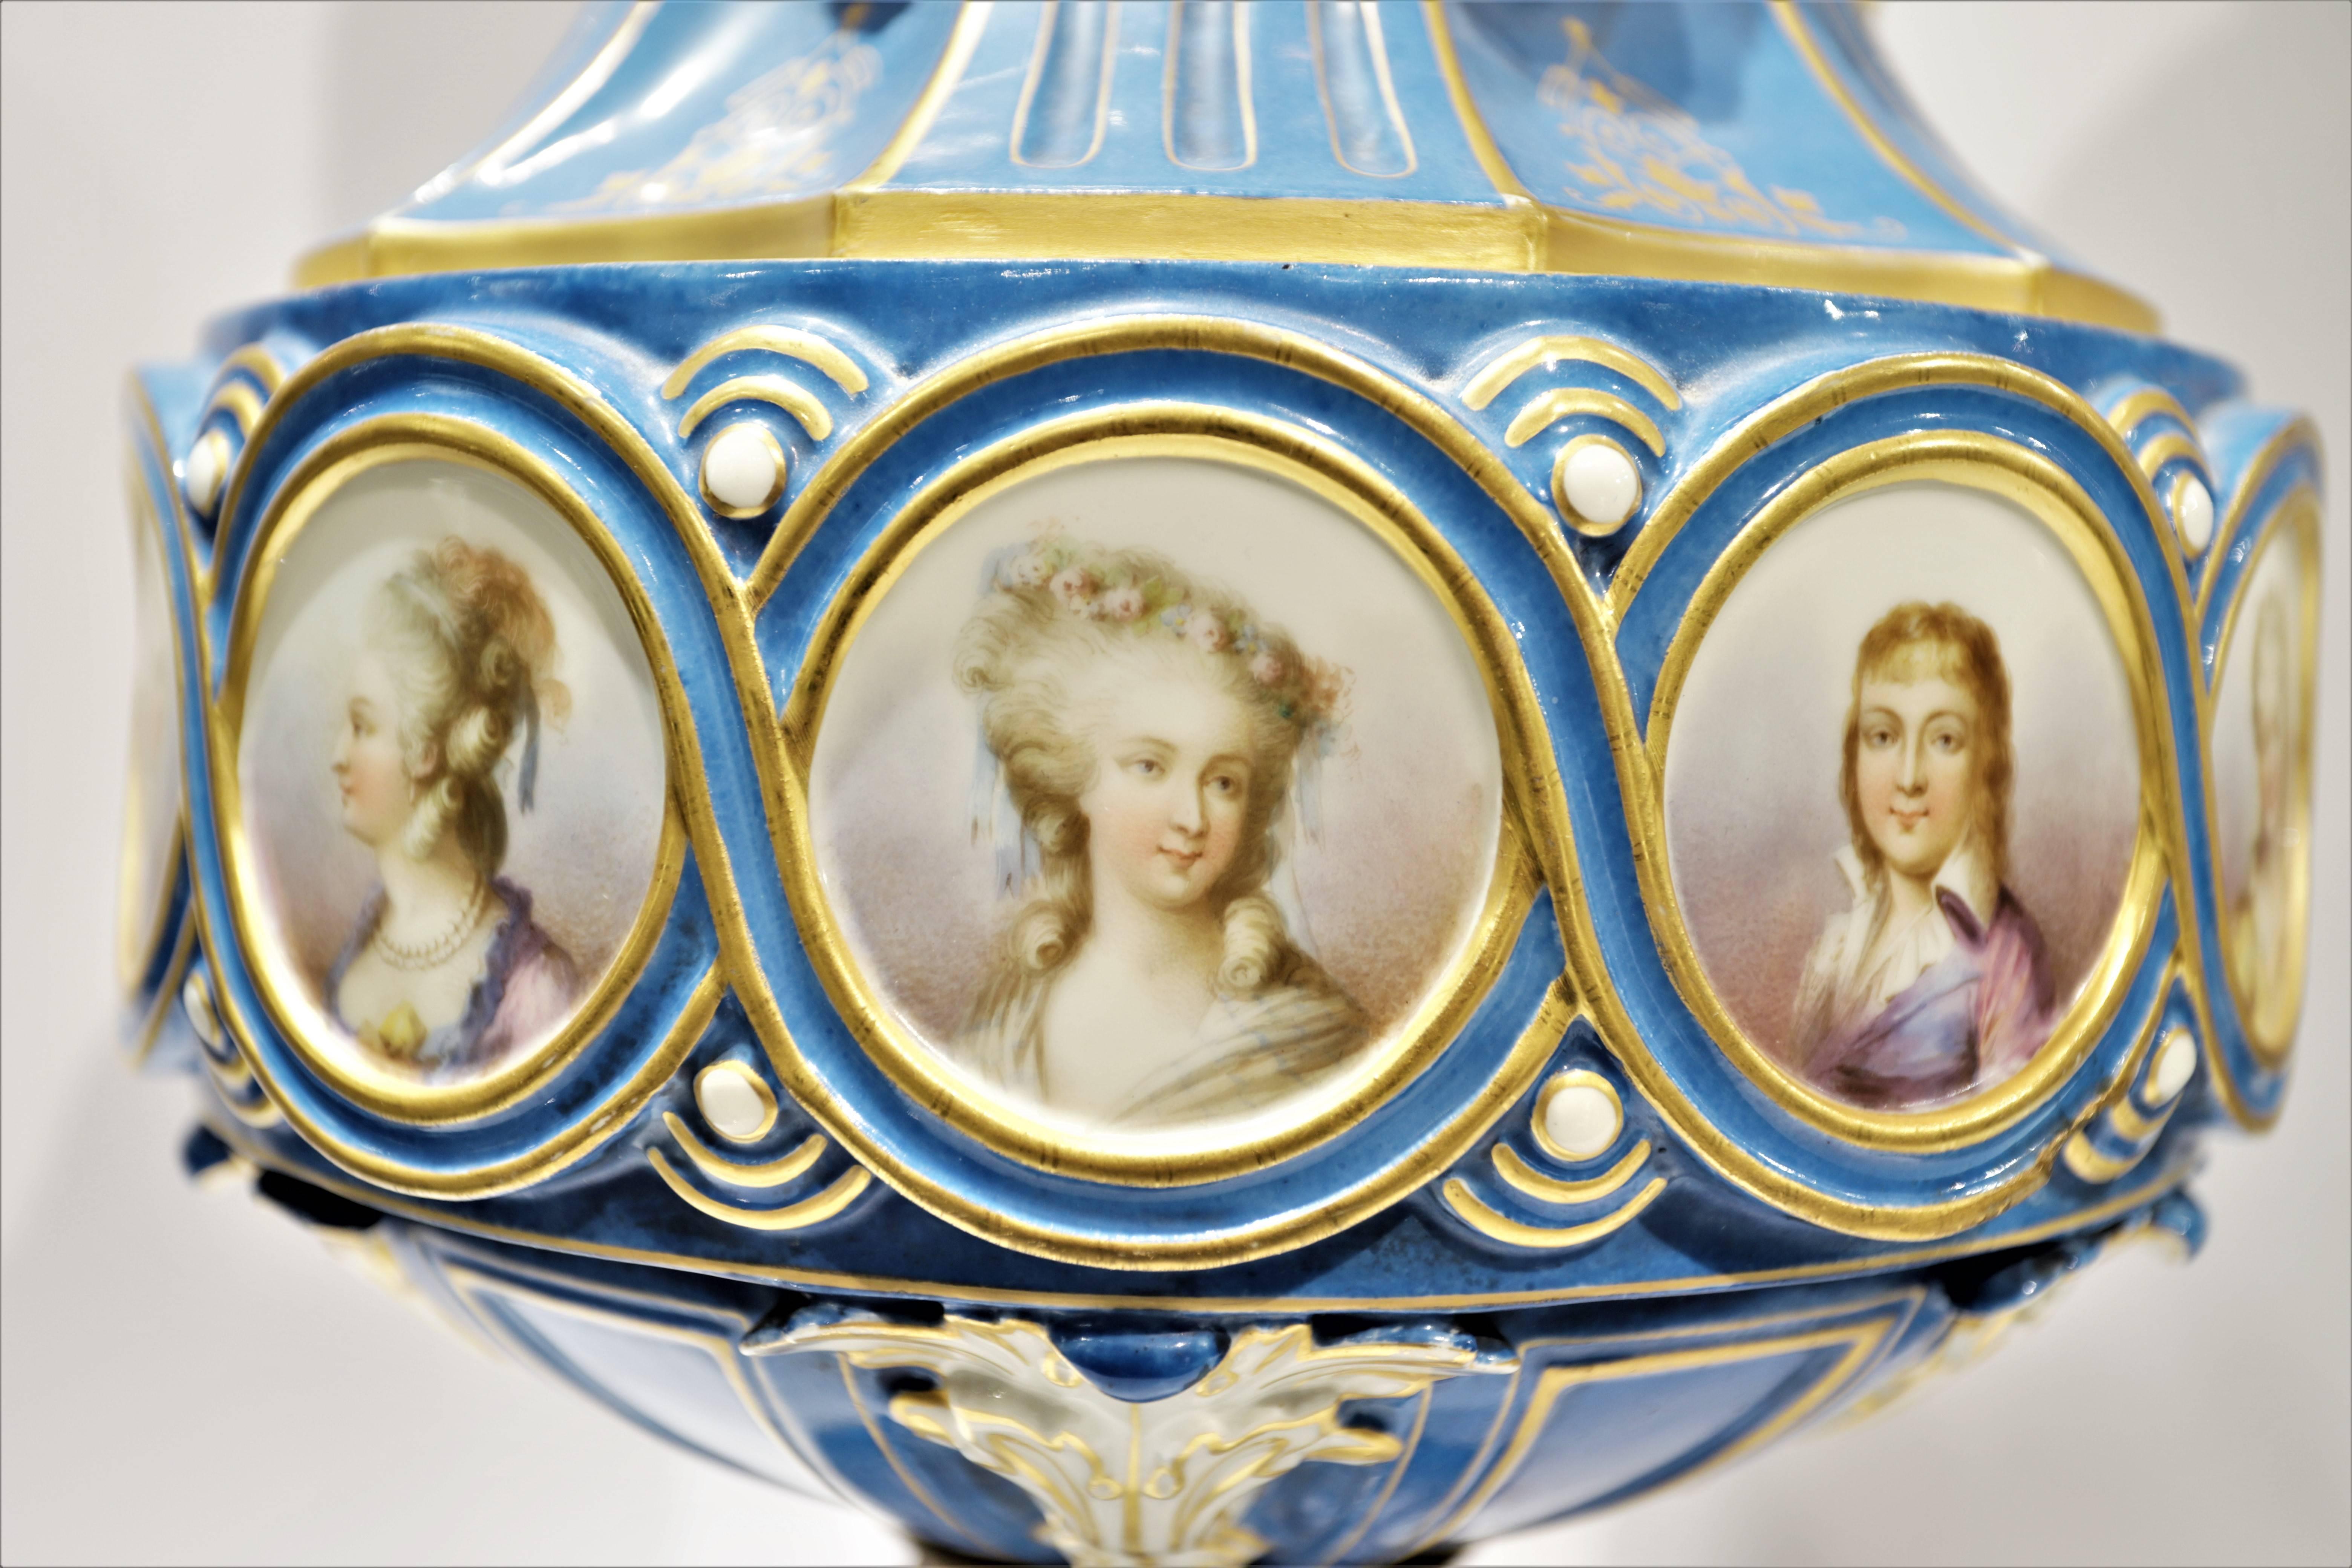 Pair of finest quality French 19th century Sevres style Celeste blue portrait urns,
depicting the portraits of Louis XVI and Marry Antoinette.